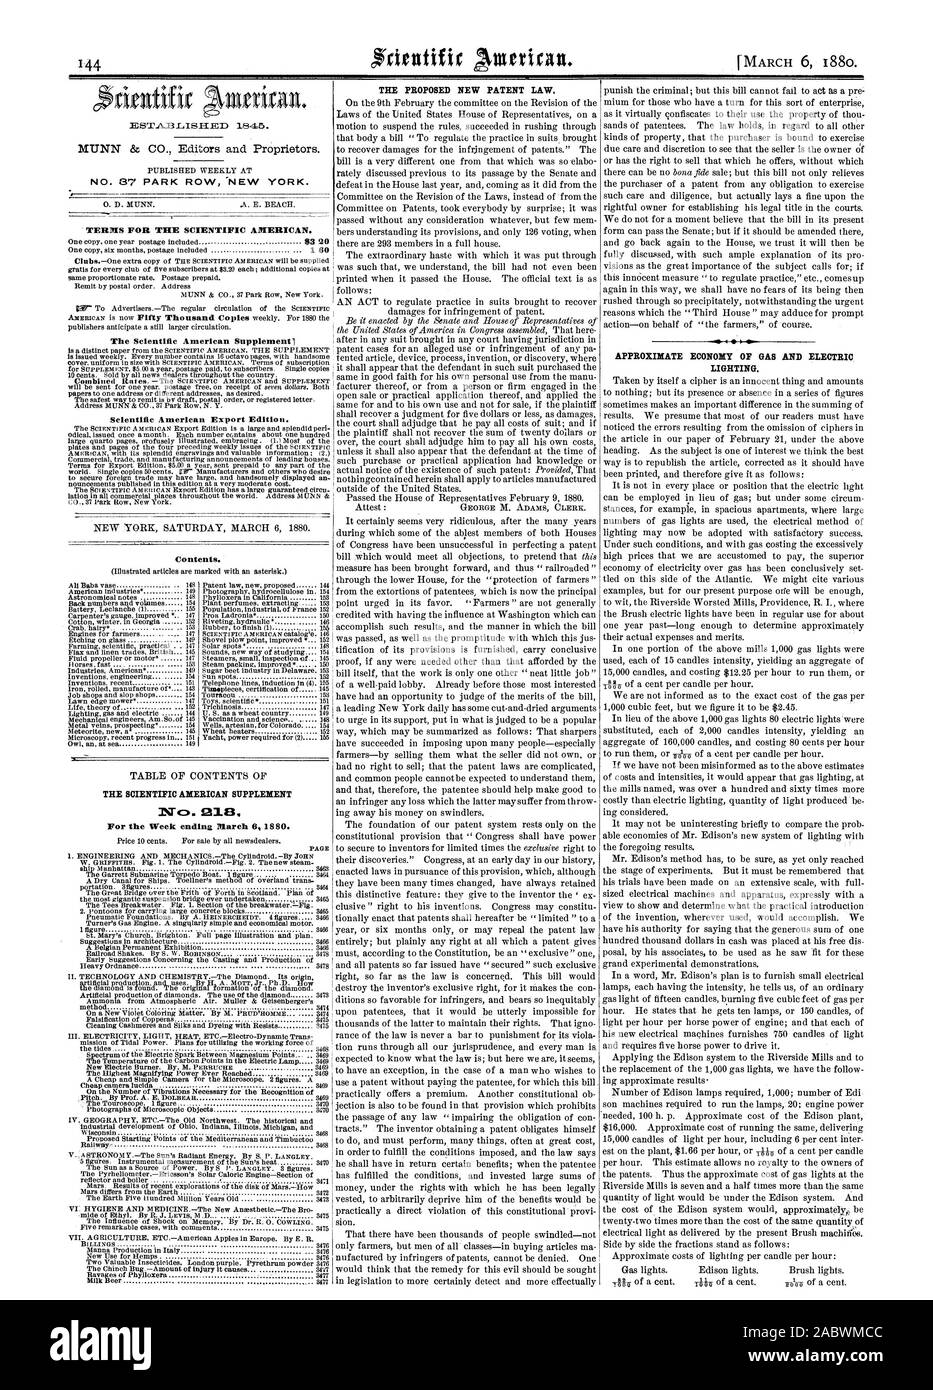 NO. 87 PARK ROW NEW YORK. TERMS FOR THE SCIENTIFIC AMERICAN. The Scientific American Supplement1 Scientific American Export Edition. Contents. THE SCIENTIFIC AMERICAN SUPPLEMENT 123. For the Week ending March 6 1880. THE PROPOSED NEW PATENT LAW. APPROXIMATE ECONOMY OF GAS AND ELECTRIC LIGHTING., 1880-03-06 Stock Photo